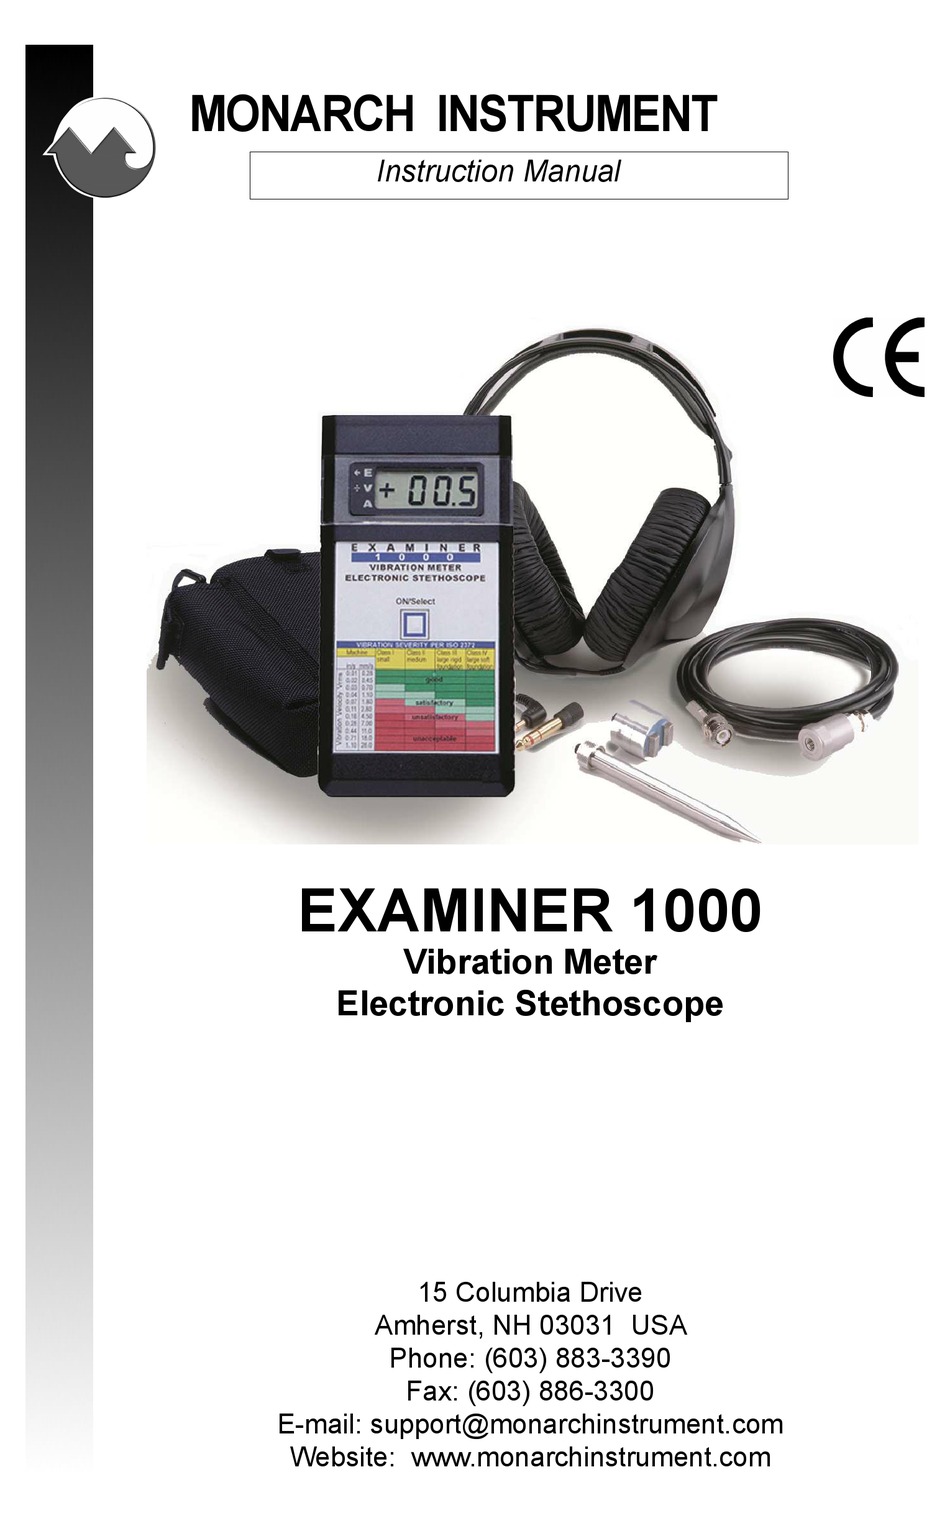 Monarch Examiner 1000 Vibration Meter Kit Electronic Stethoscope for sale online 